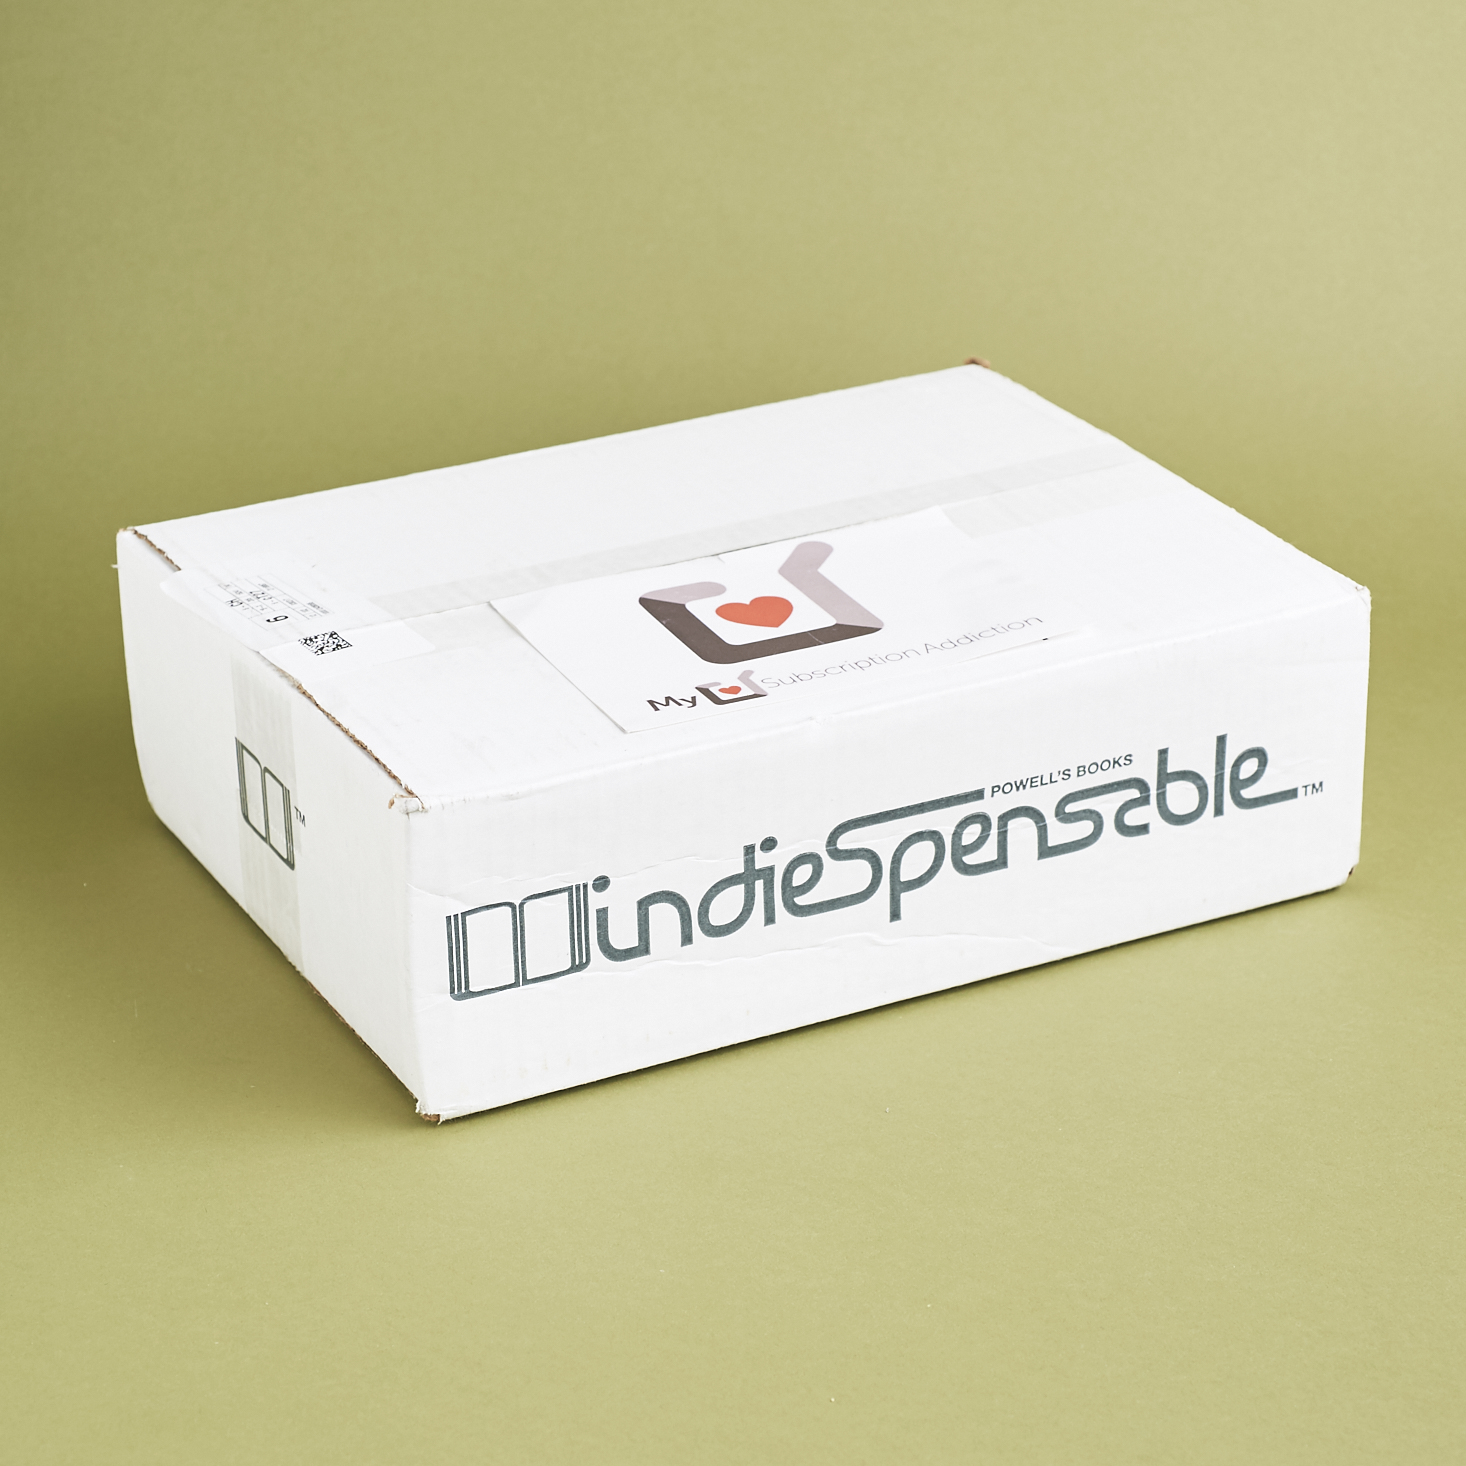 Powell’s Books Indiespensable Subscription Box Review – Vol. 65